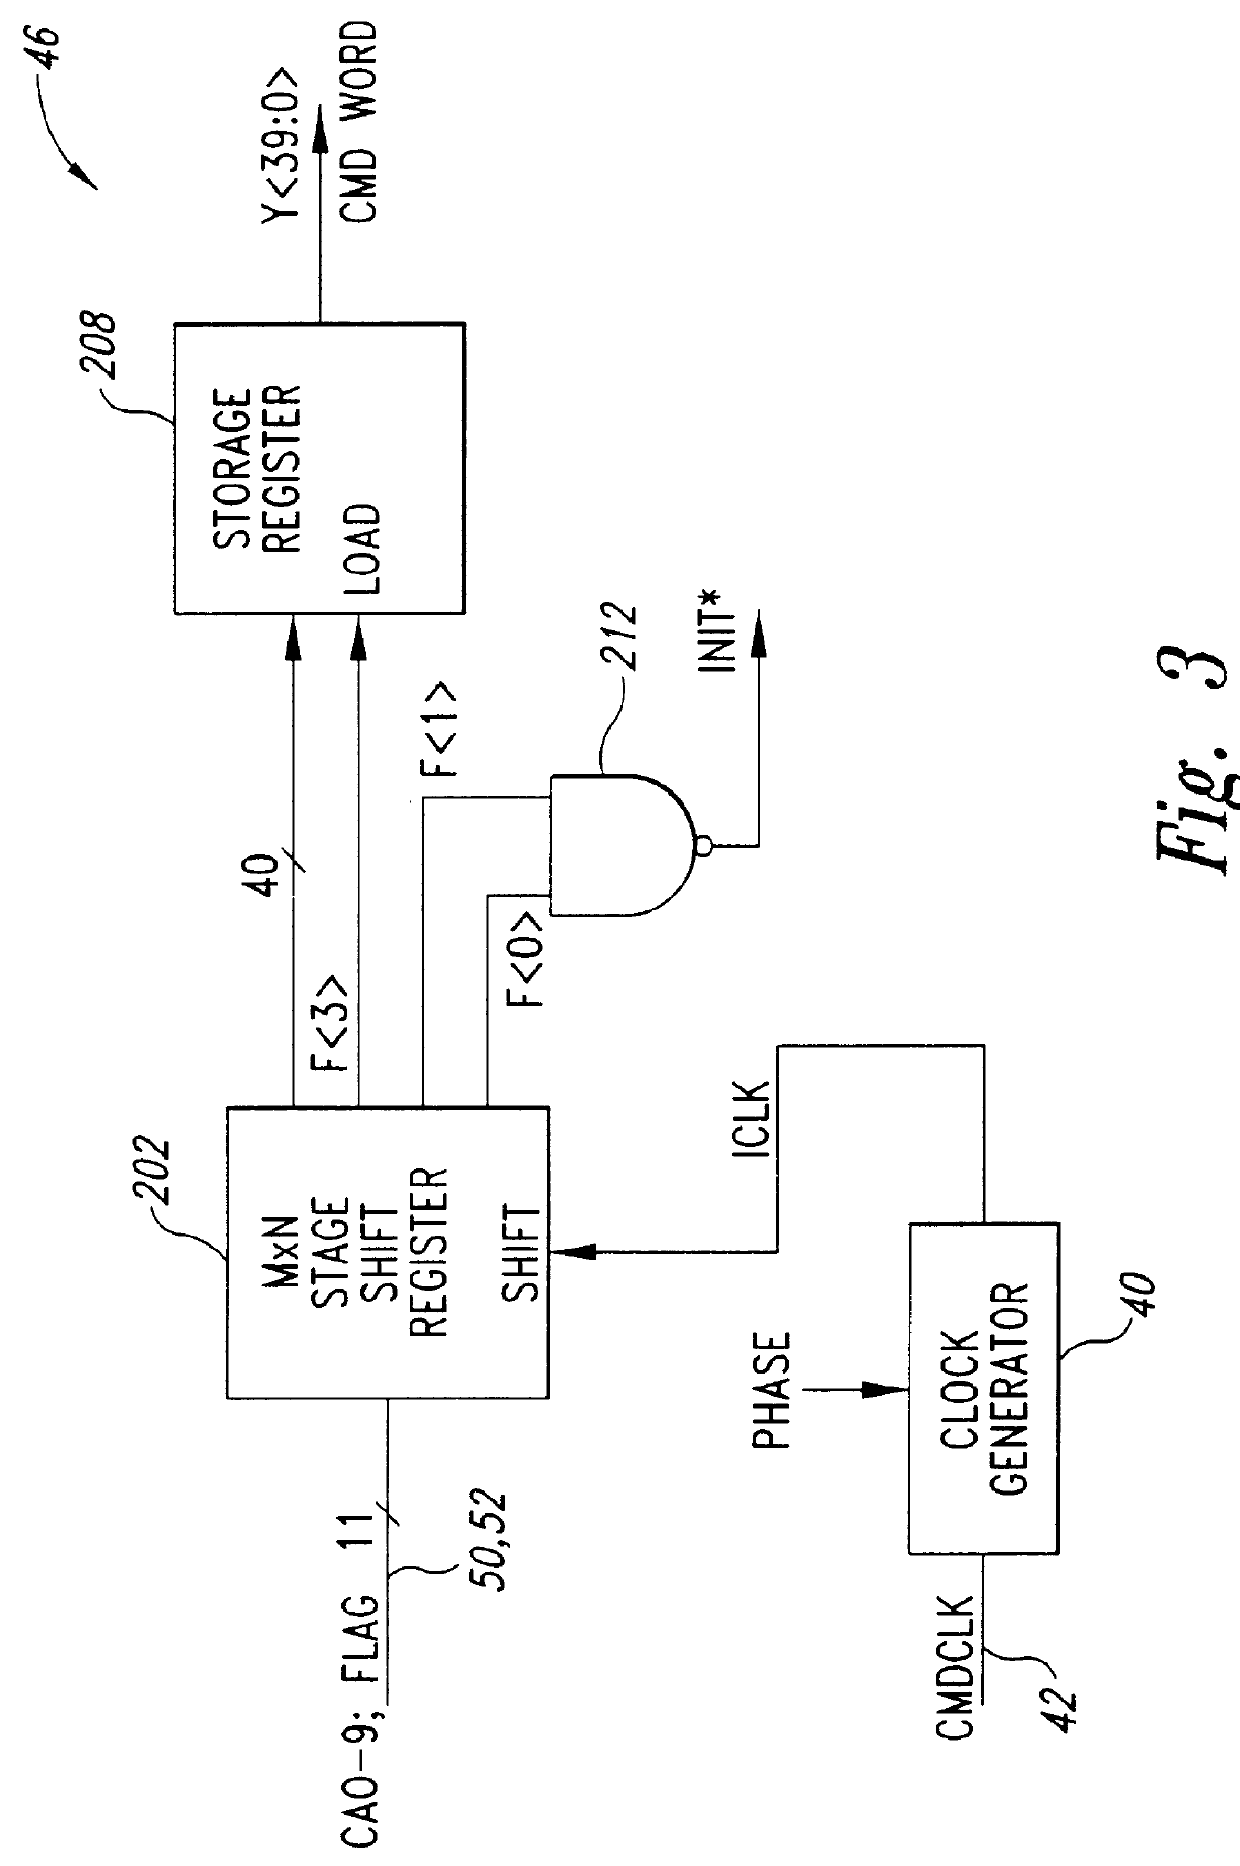 Method and apparatus for detecting an initialization signal and a command packet error in packetized dynamic random access memories